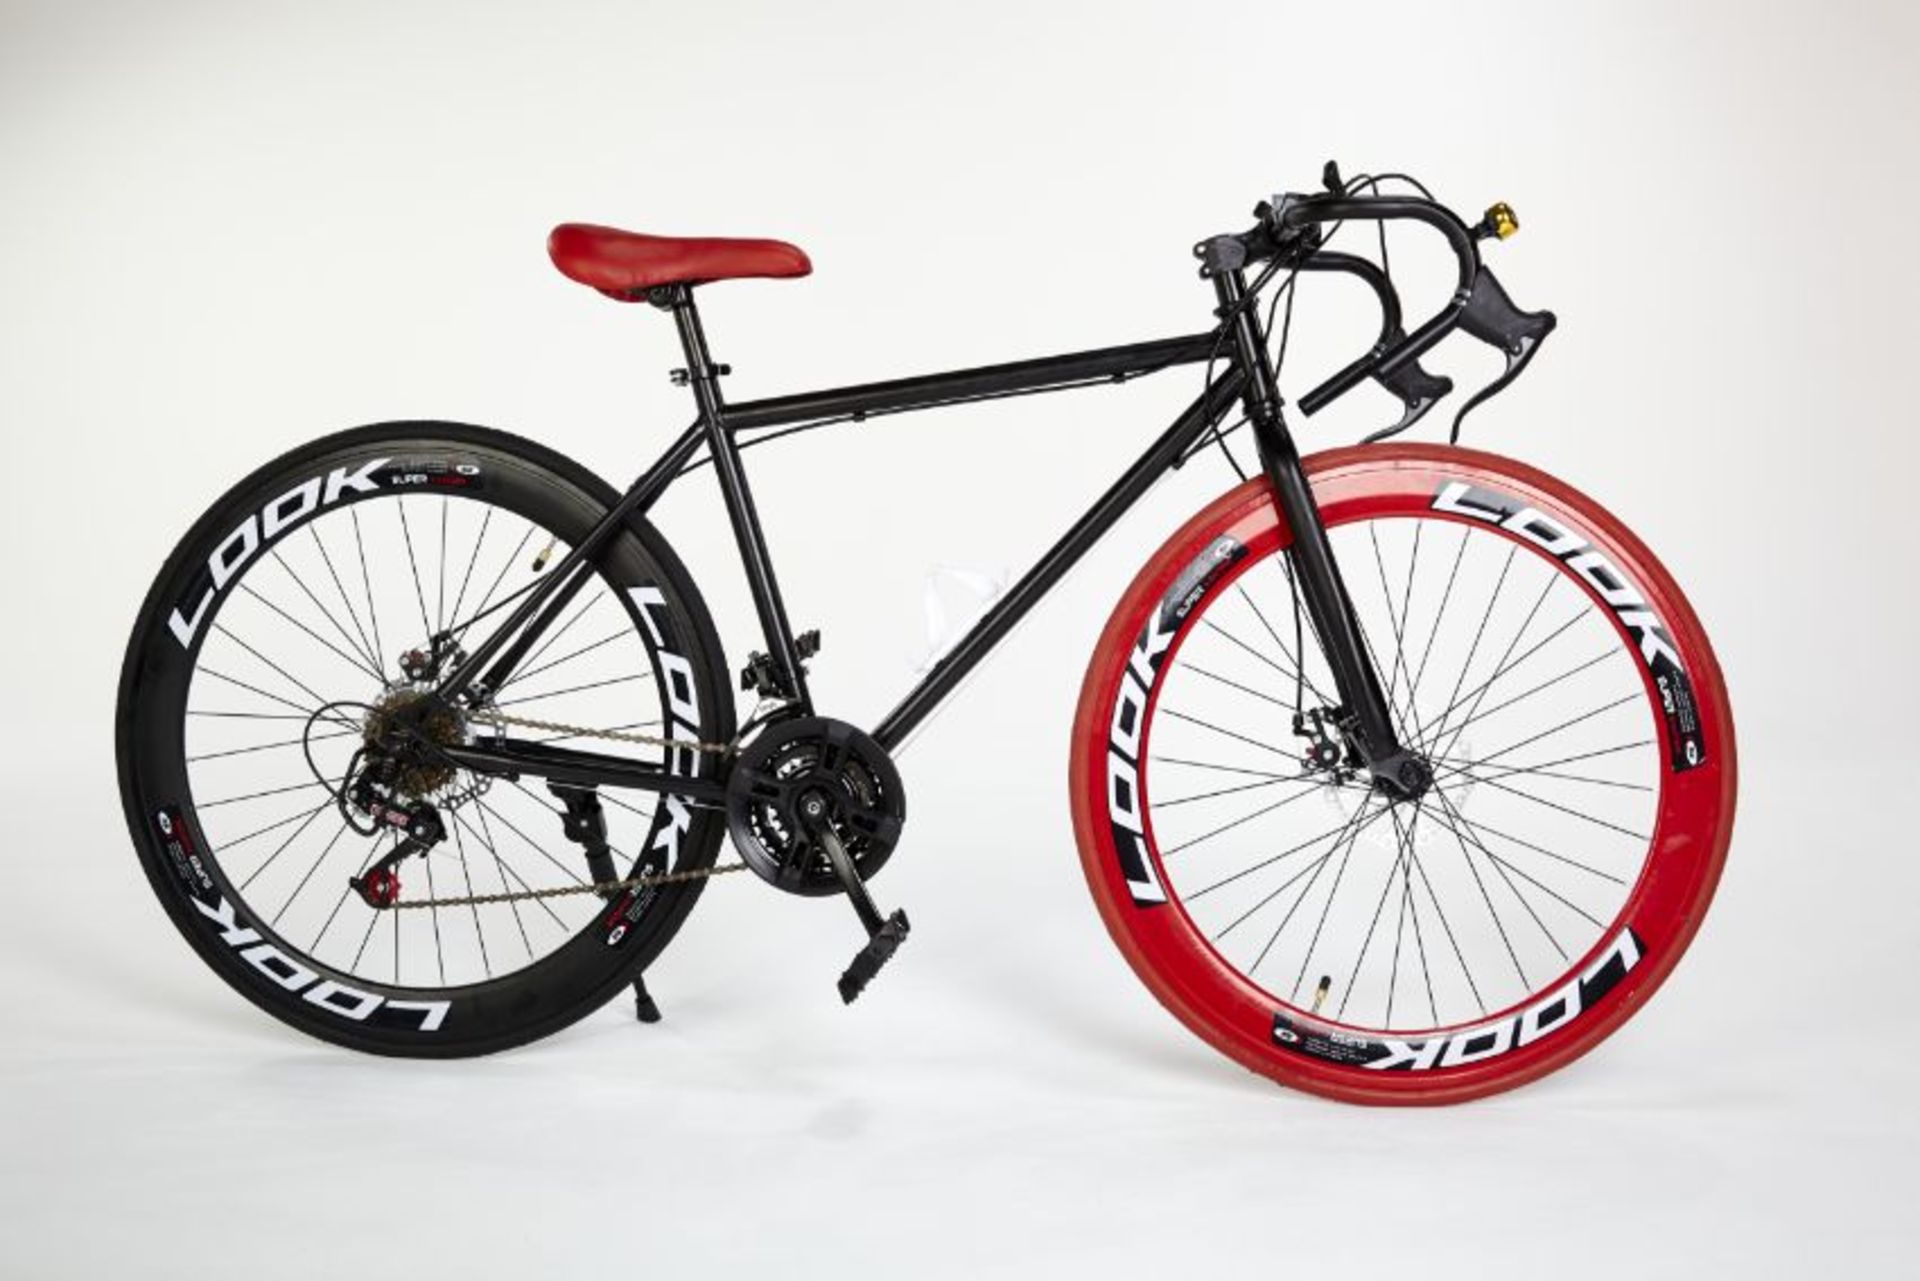 RED/BLACK STREET BIKE WITH 21 GREAR, BRAKE DISKS, KICK STAND, COOL THIN TYRES COMES BOXED - Bild 6 aus 10